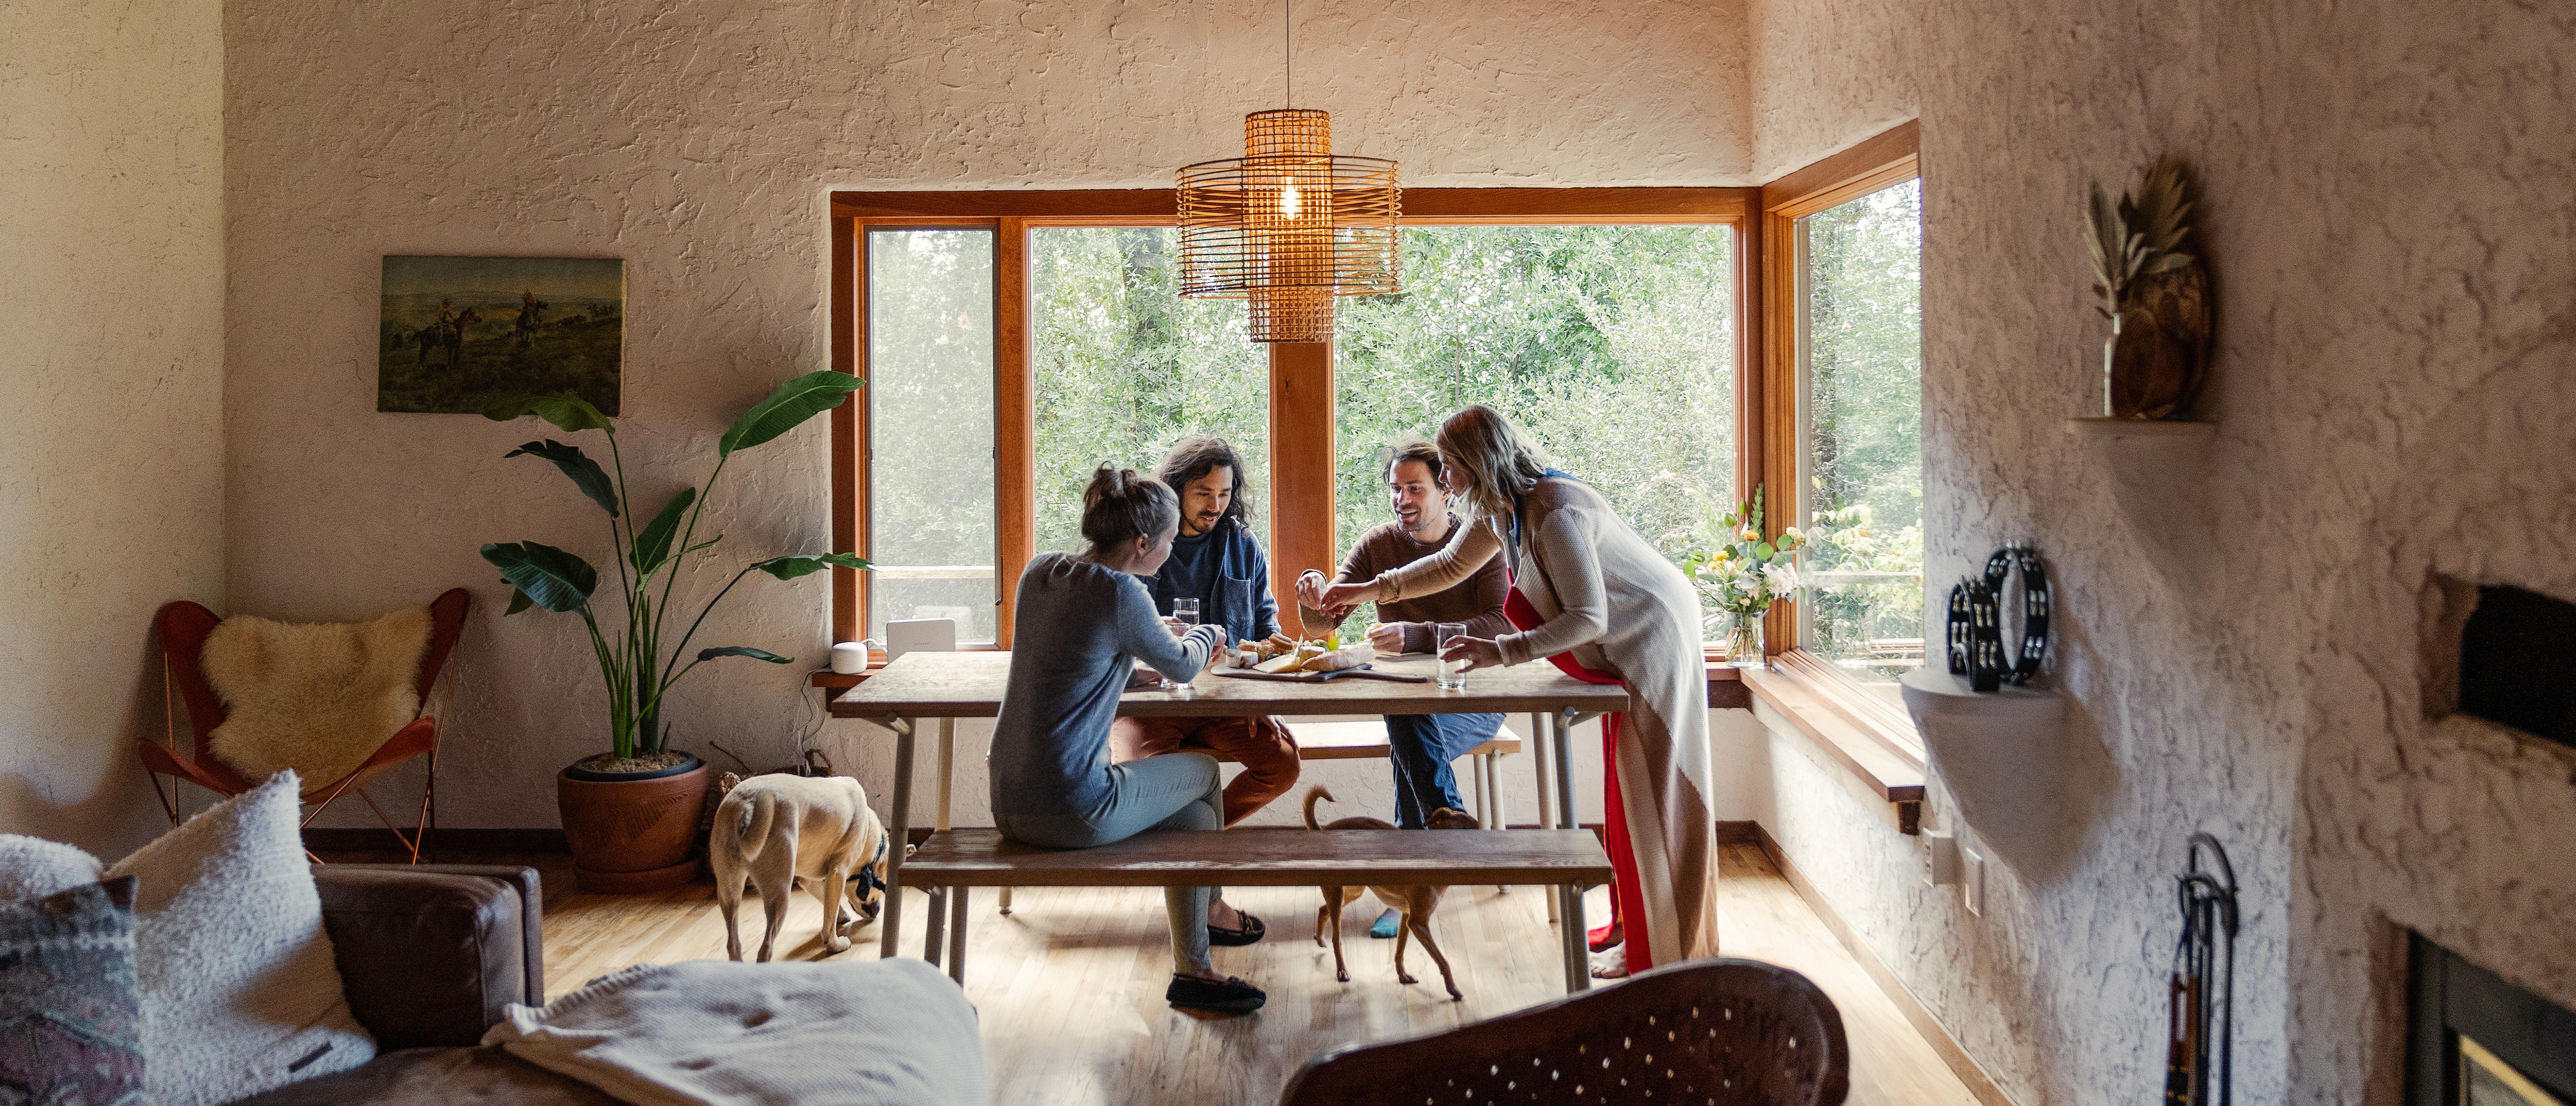 The History of Airbnb. Short-term rentals have been around for